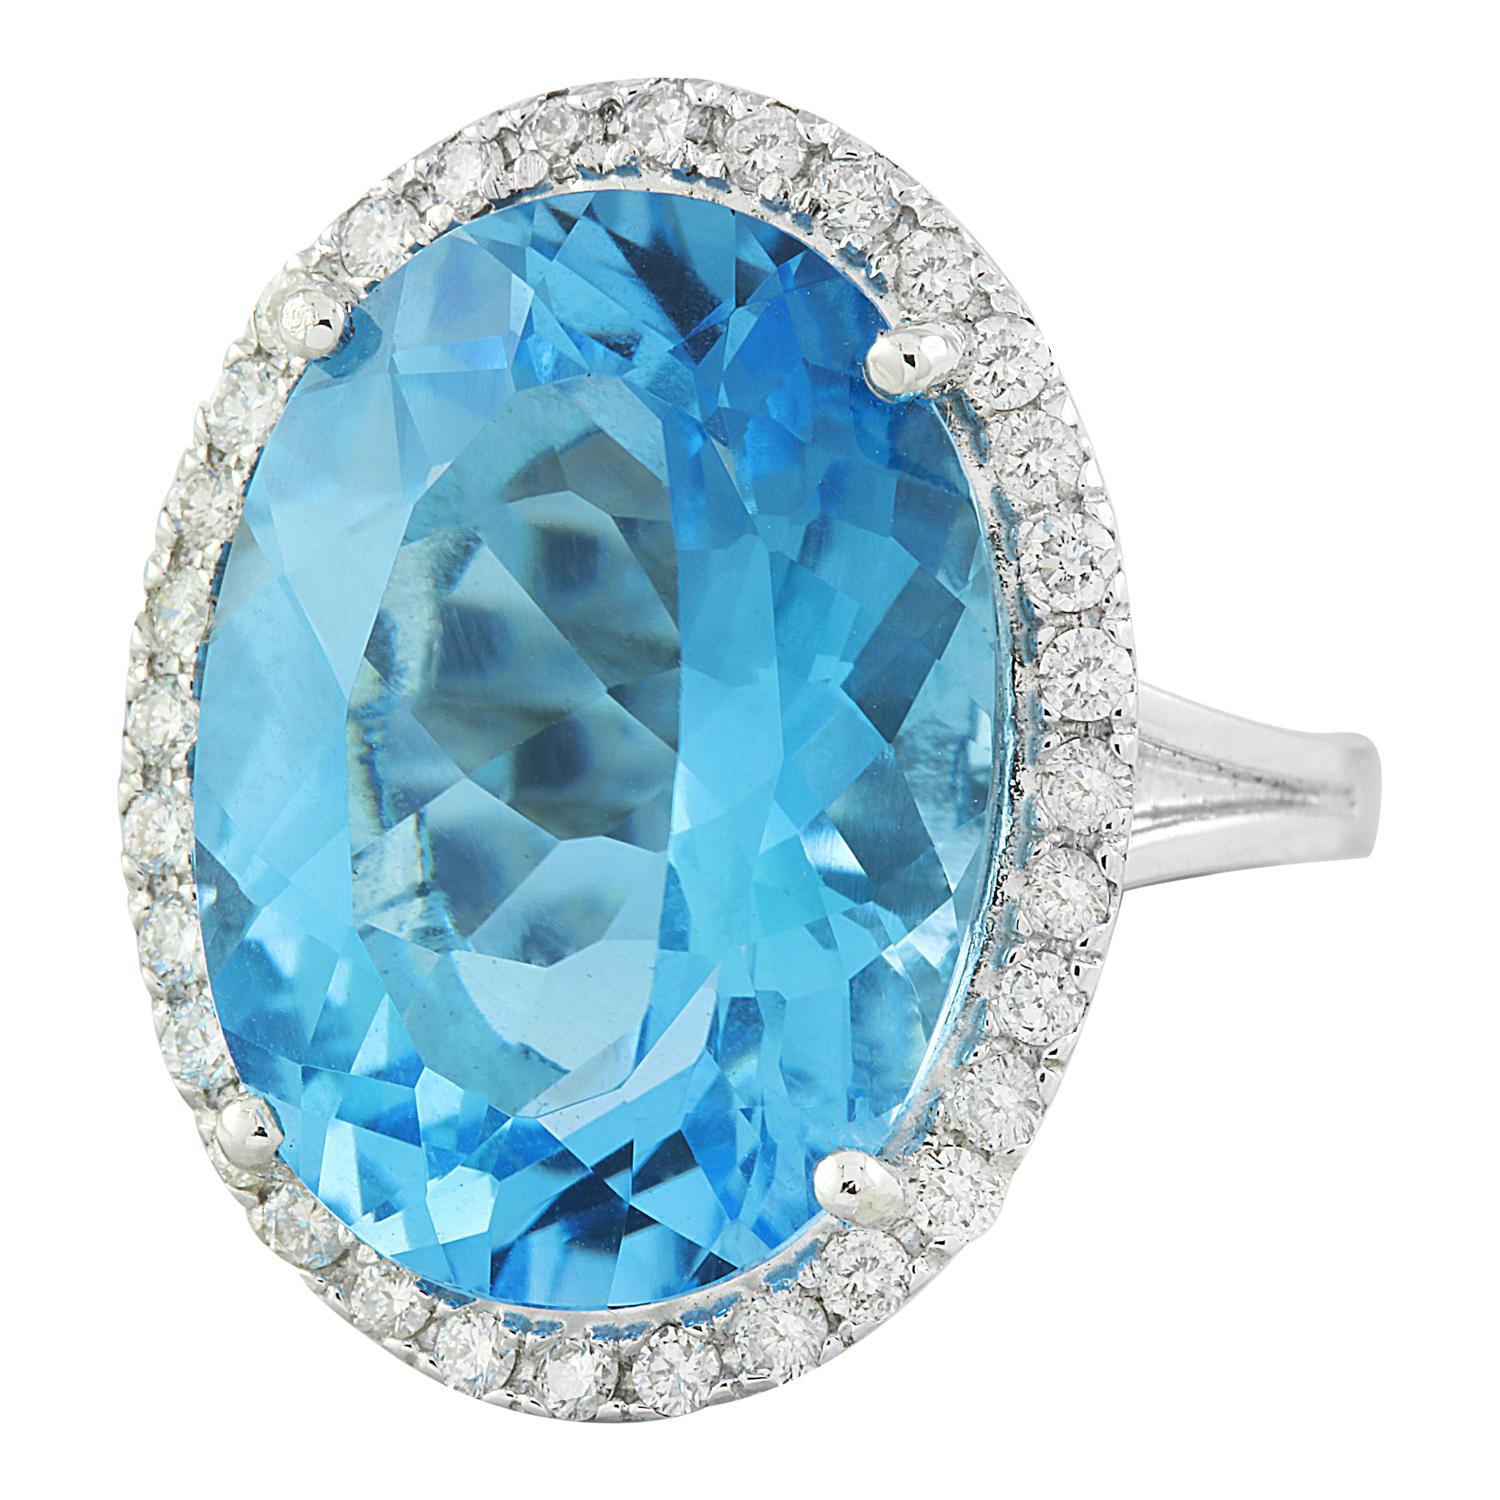 Introducing our magnificent 14 Karat Solid White Gold Diamond Ring featuring a stunning 20.50 Carat Natural Topaz centerpiece, stamped for authenticity. Crafted with precision and elegance, this ring is a true statement of luxury. Weighing 9.5